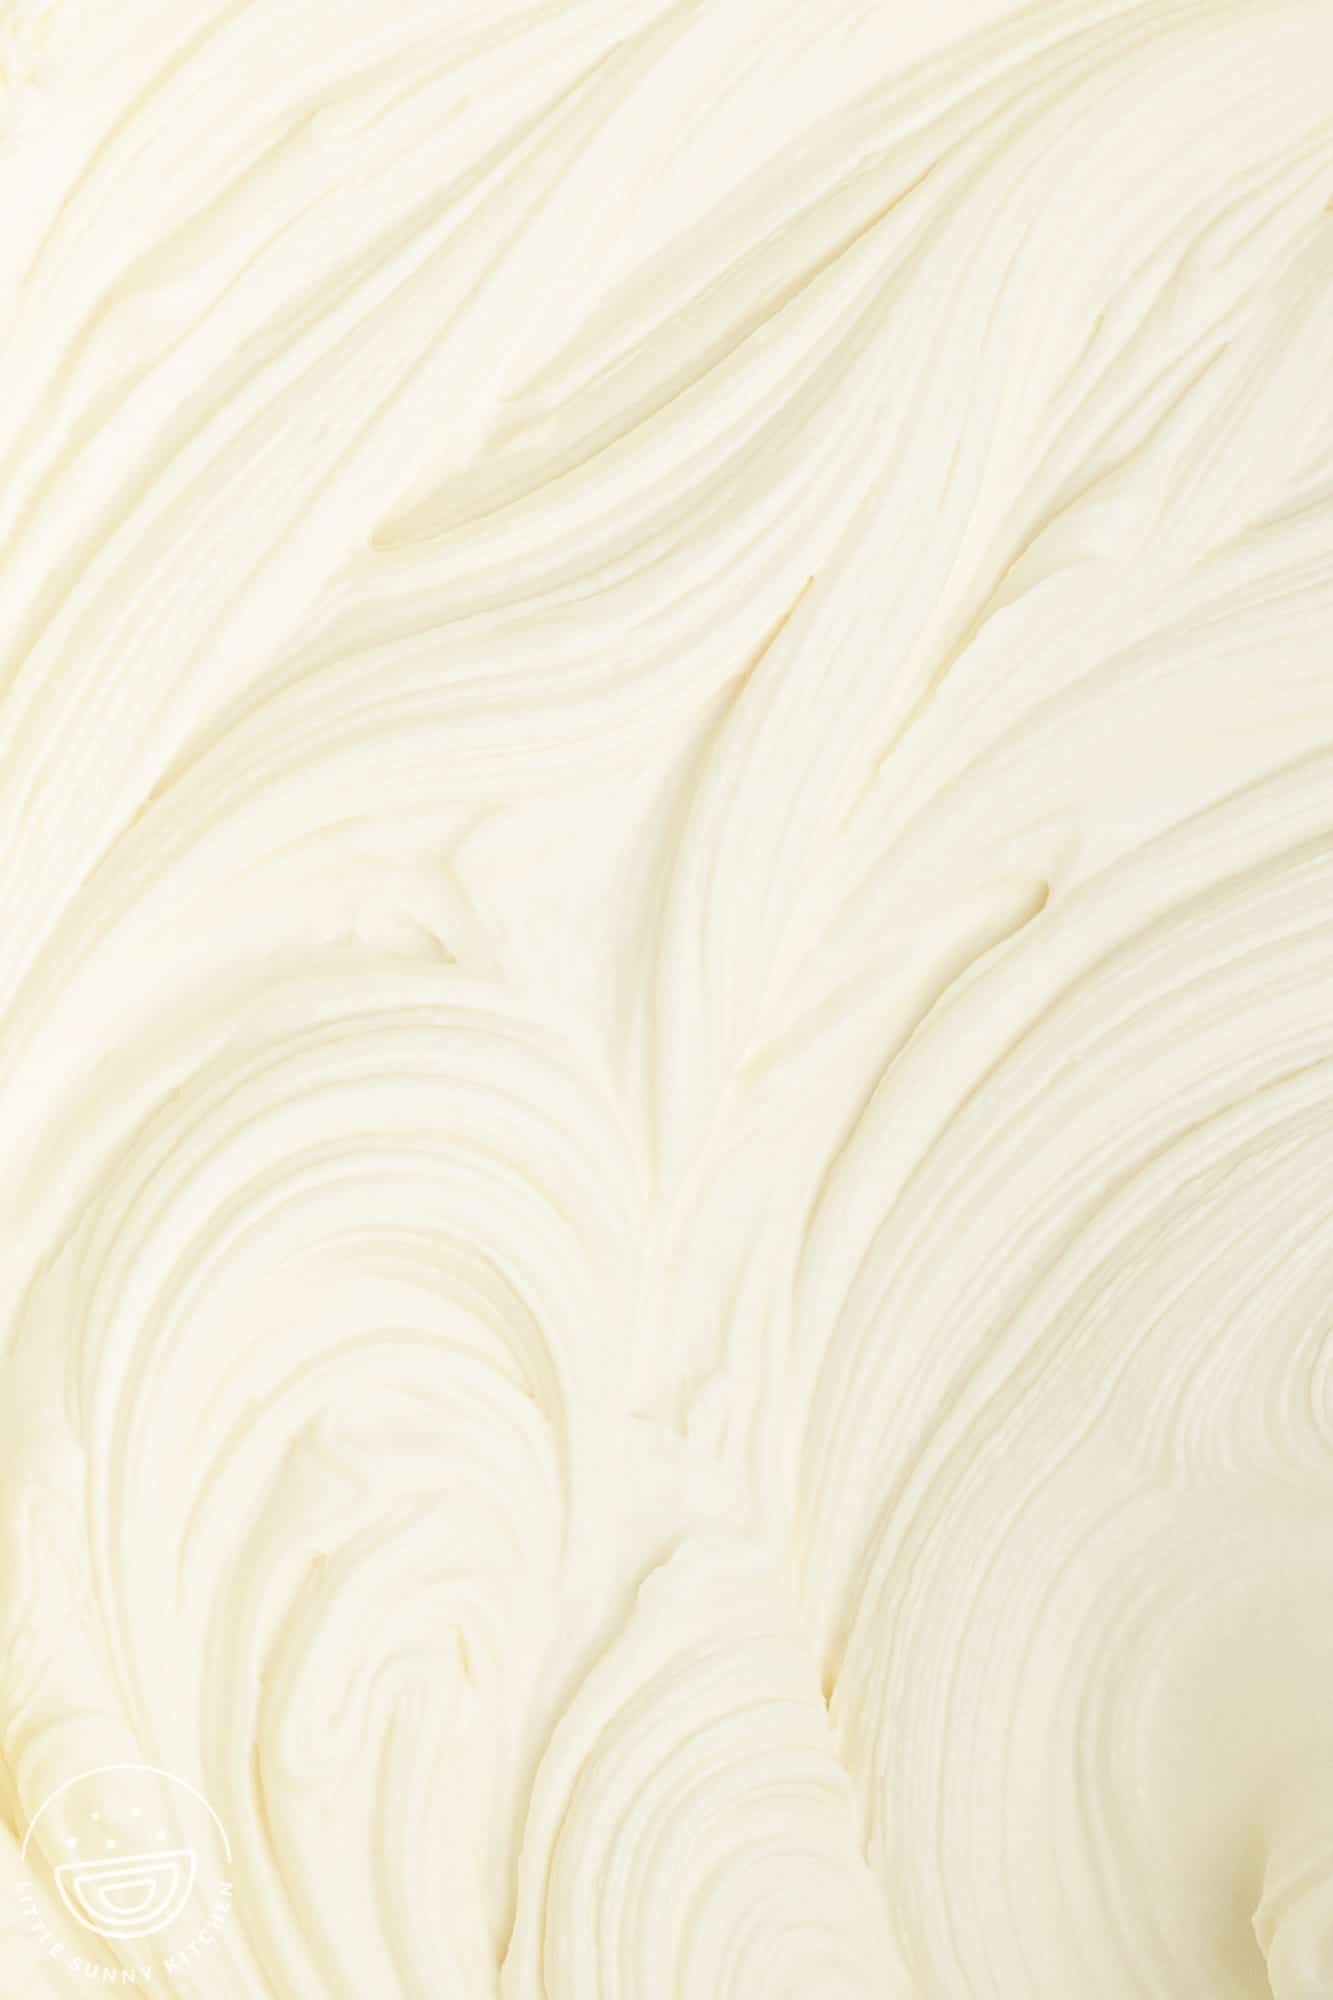 Whipped white chocolate buttercream, close up shot